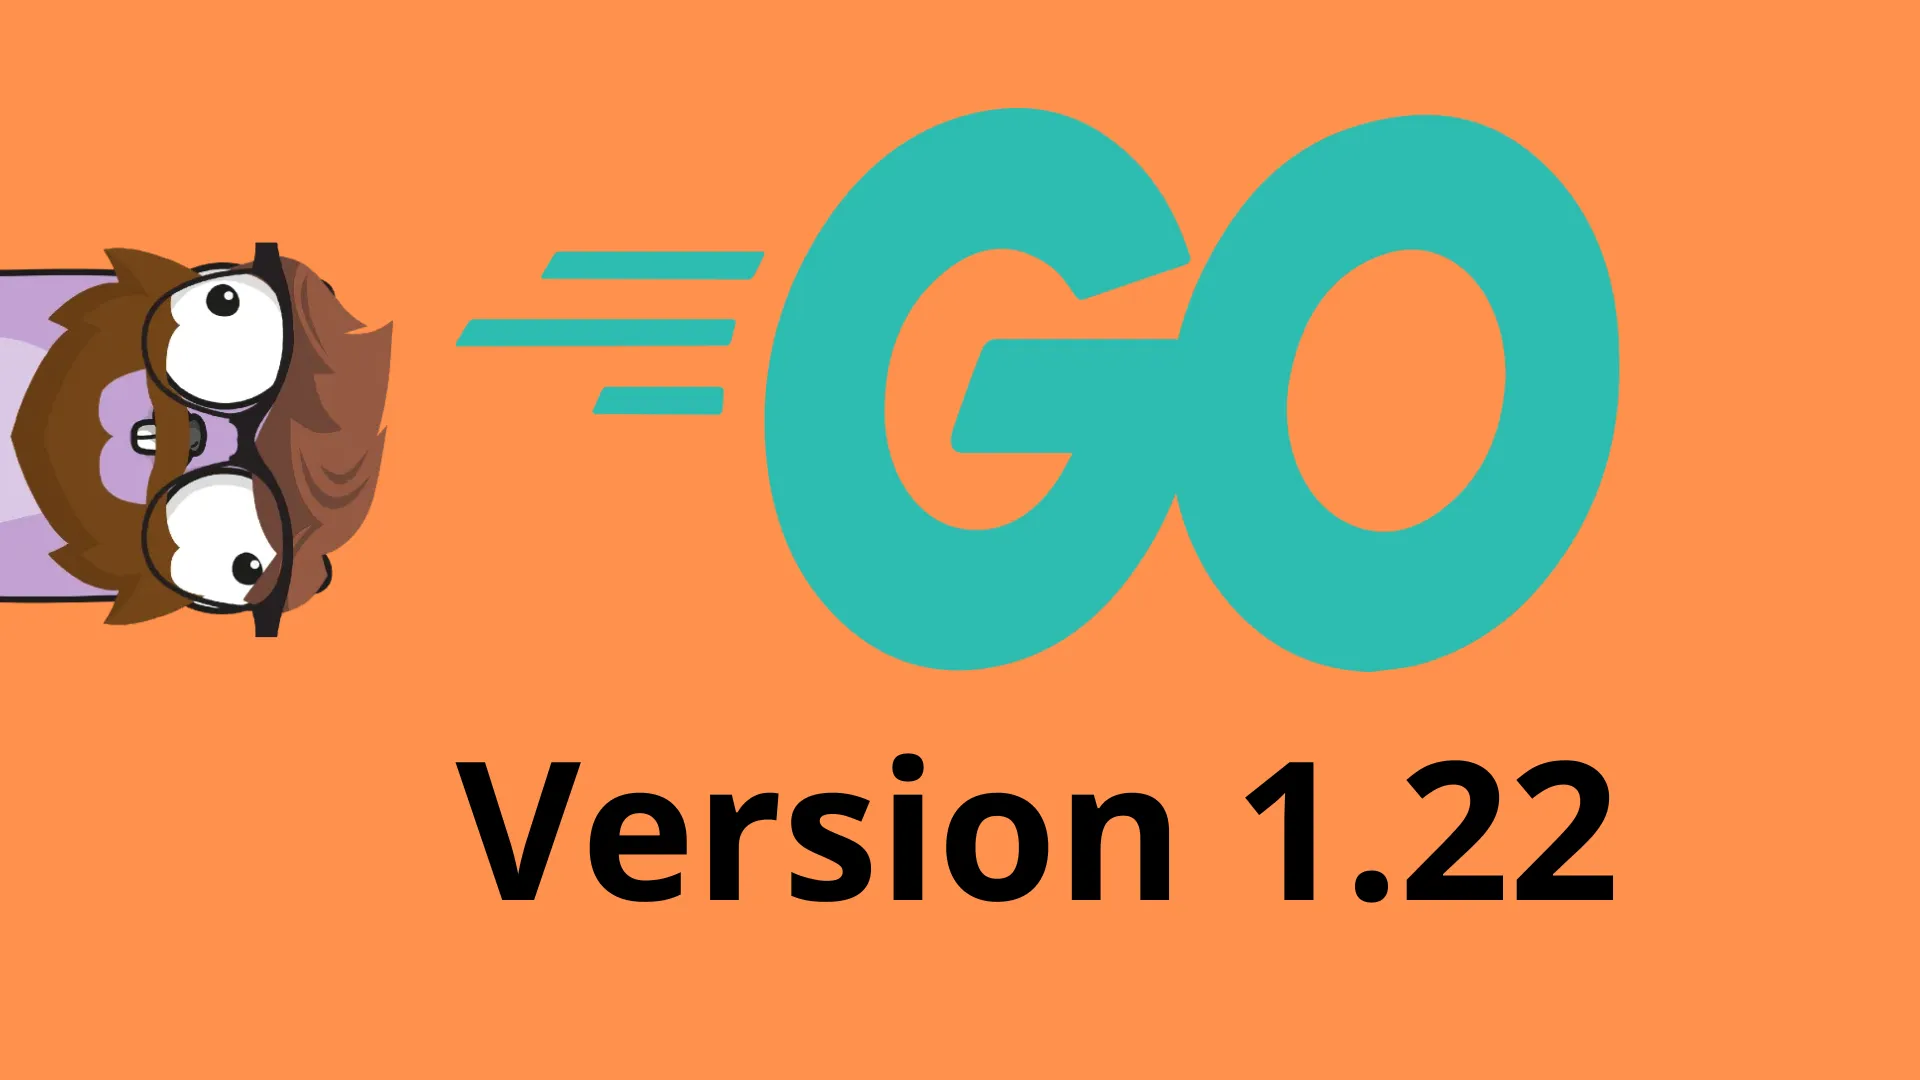 Go Version 1.22 is finally out